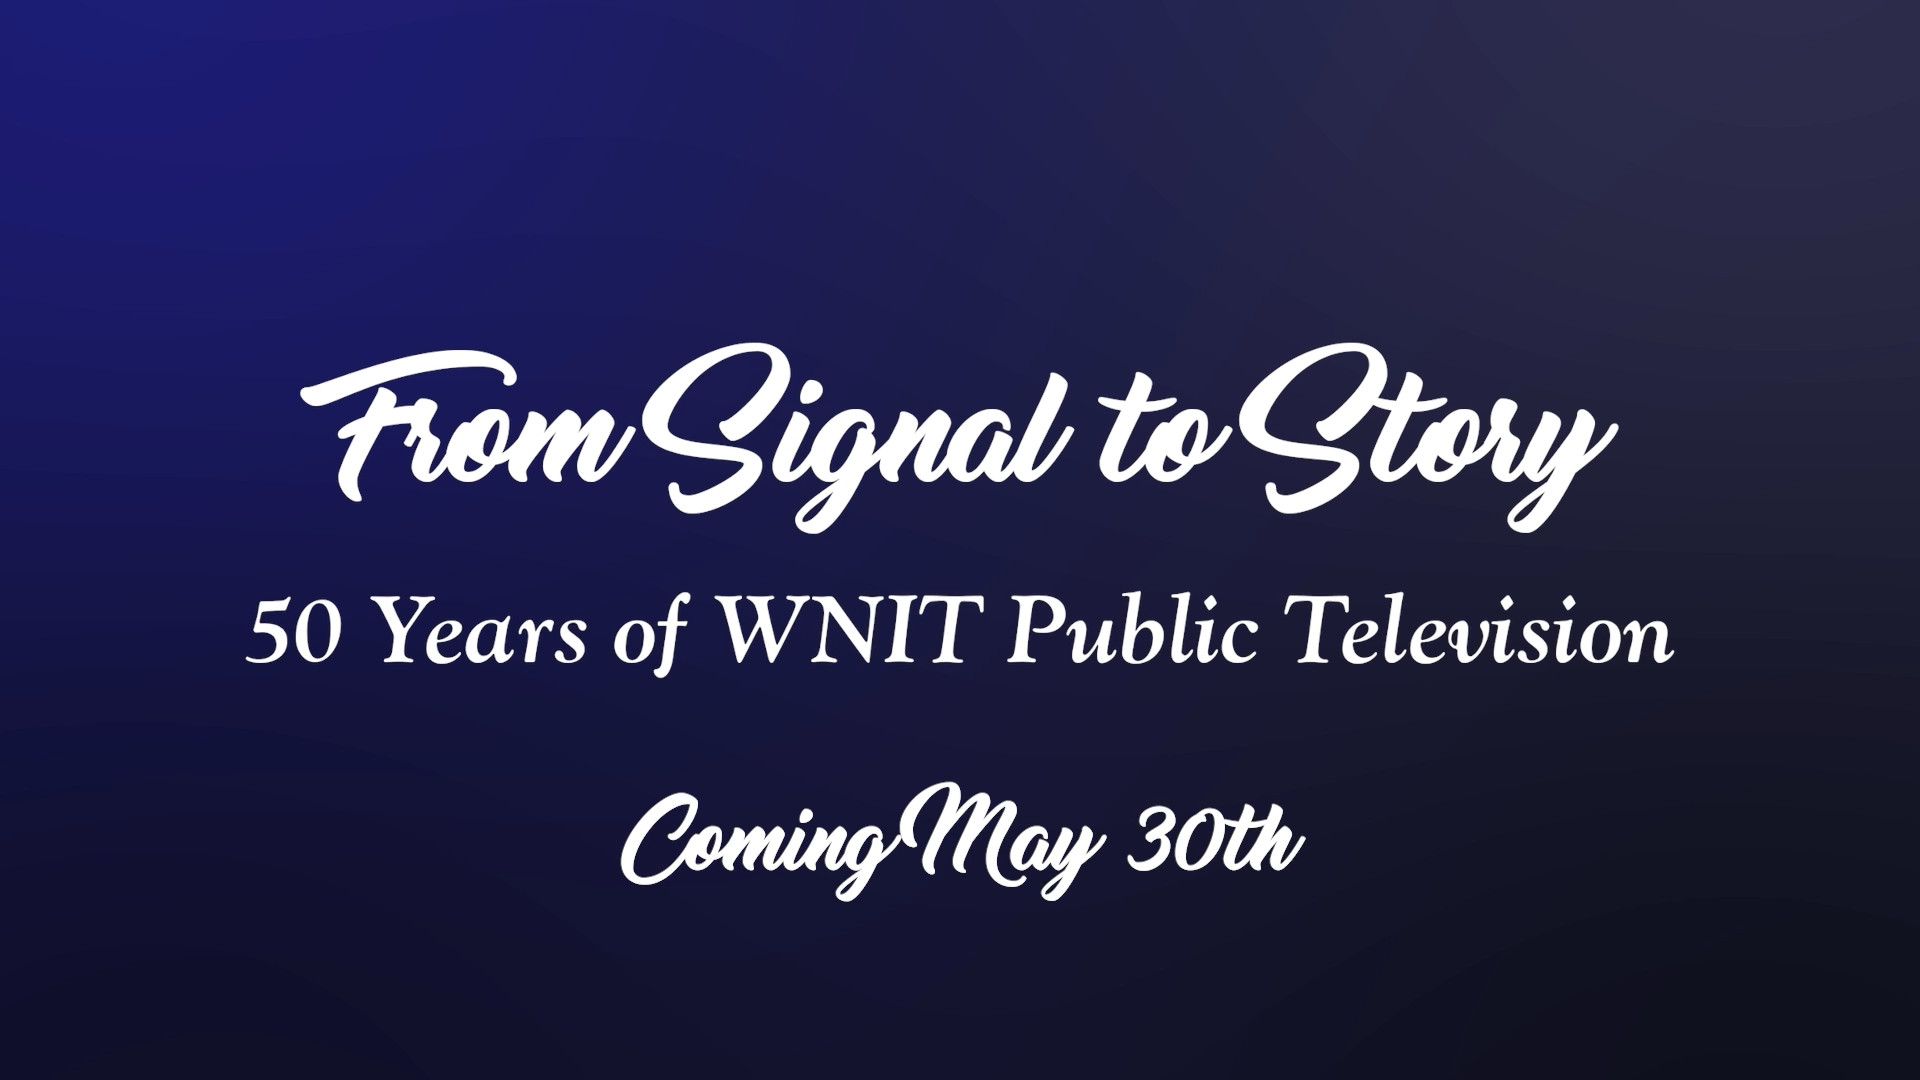  From Signal to Story: 50 Years of WNIT Public Television banner